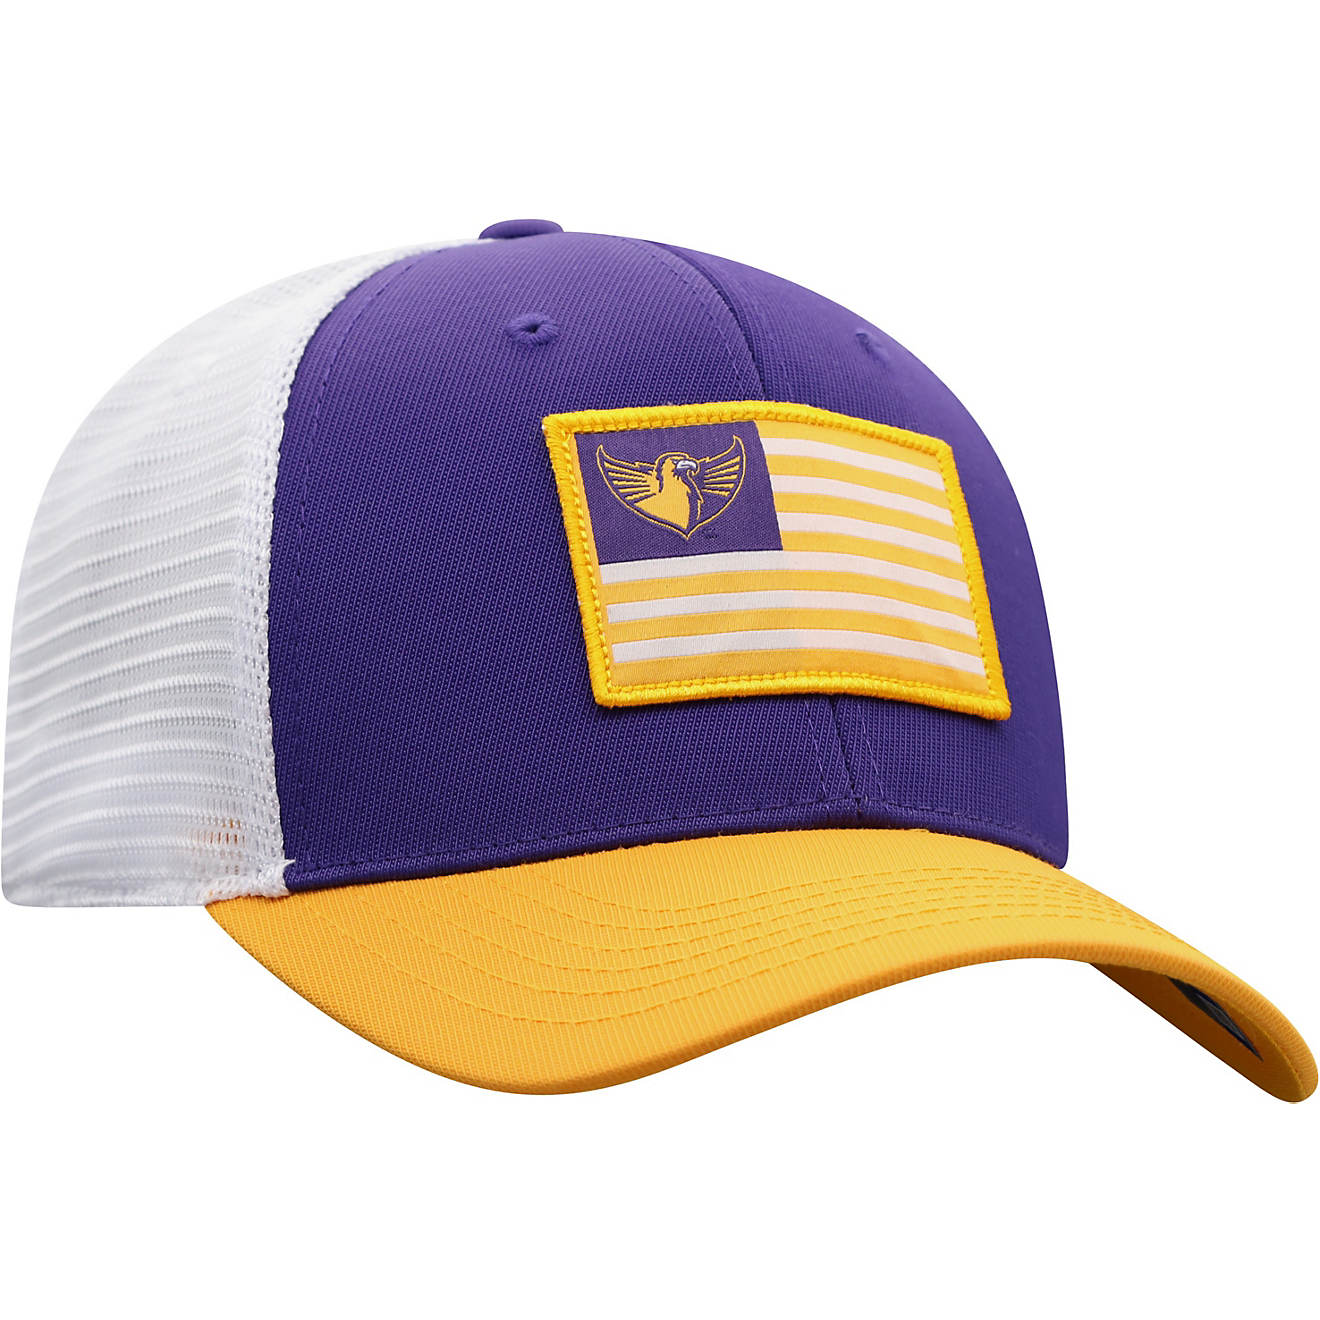 Top of the World Men's Tennessee Tech University Pedigree One Fit Cap                                                            - view number 1